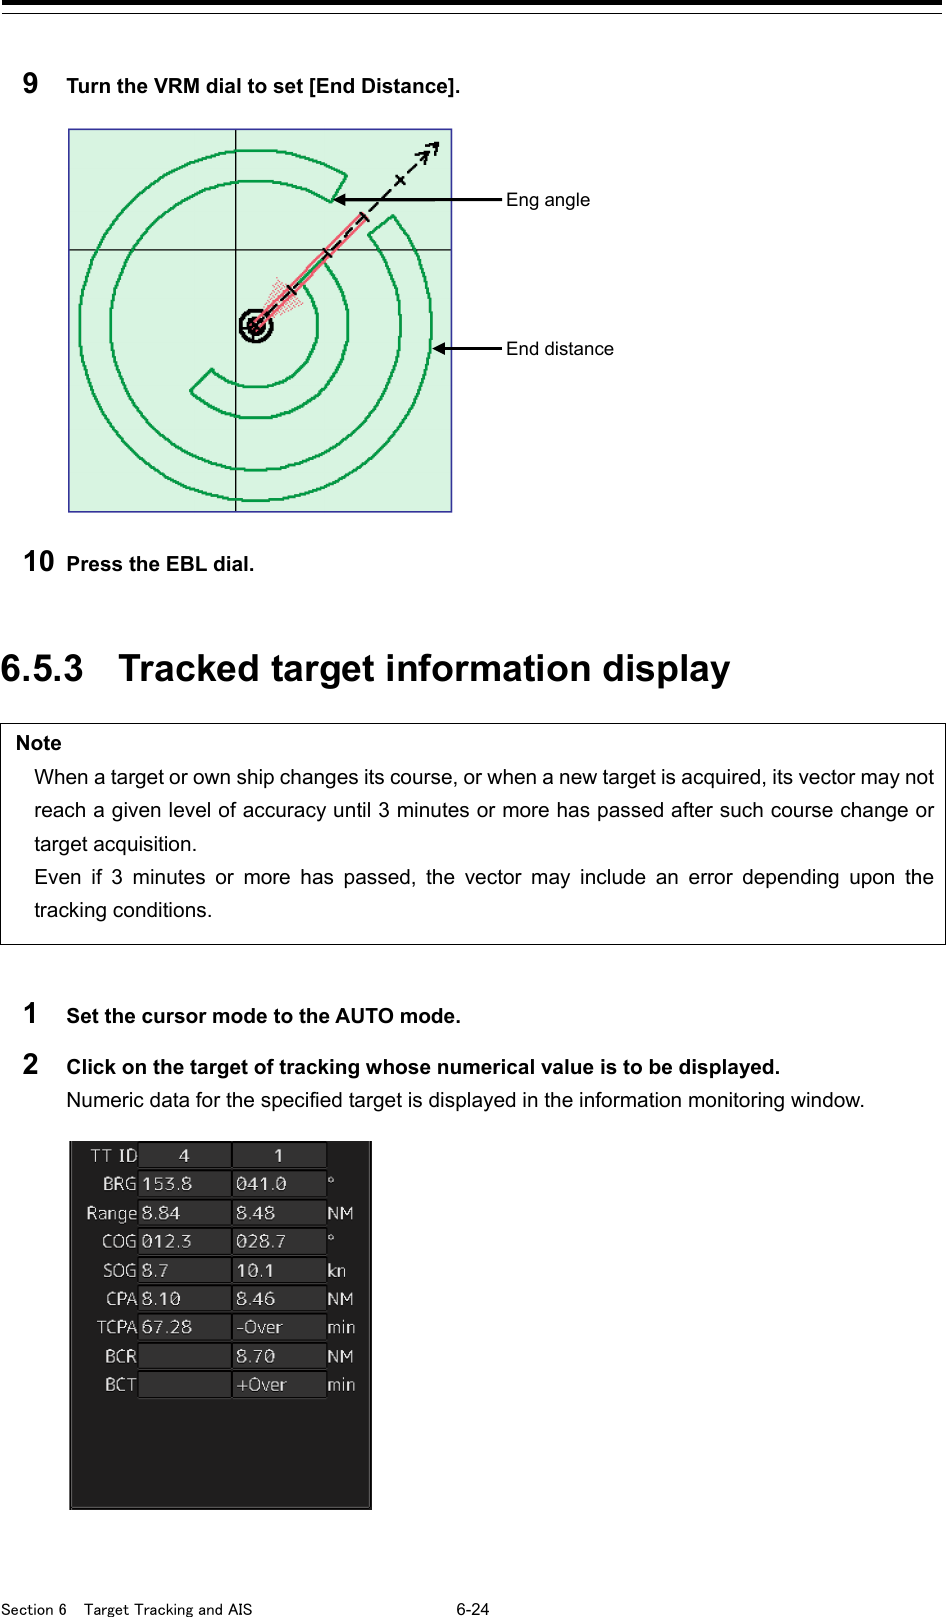  Section 6  Target Tracking and AIS 6-24  9  Turn the VRM dial to set [End Distance].   10 Press the EBL dial.   6.5.3 Tracked target information display  Note When a target or own ship changes its course, or when a new target is acquired, its vector may not reach a given level of accuracy until 3 minutes or more has passed after such course change or target acquisition. Even if 3 minutes or more has passed, the vector may include an error depending upon the tracking conditions.  1  Set the cursor mode to the AUTO mode. 2  Click on the target of tracking whose numerical value is to be displayed. Numeric data for the specified target is displayed in the information monitoring window.     Eng angle End distance 